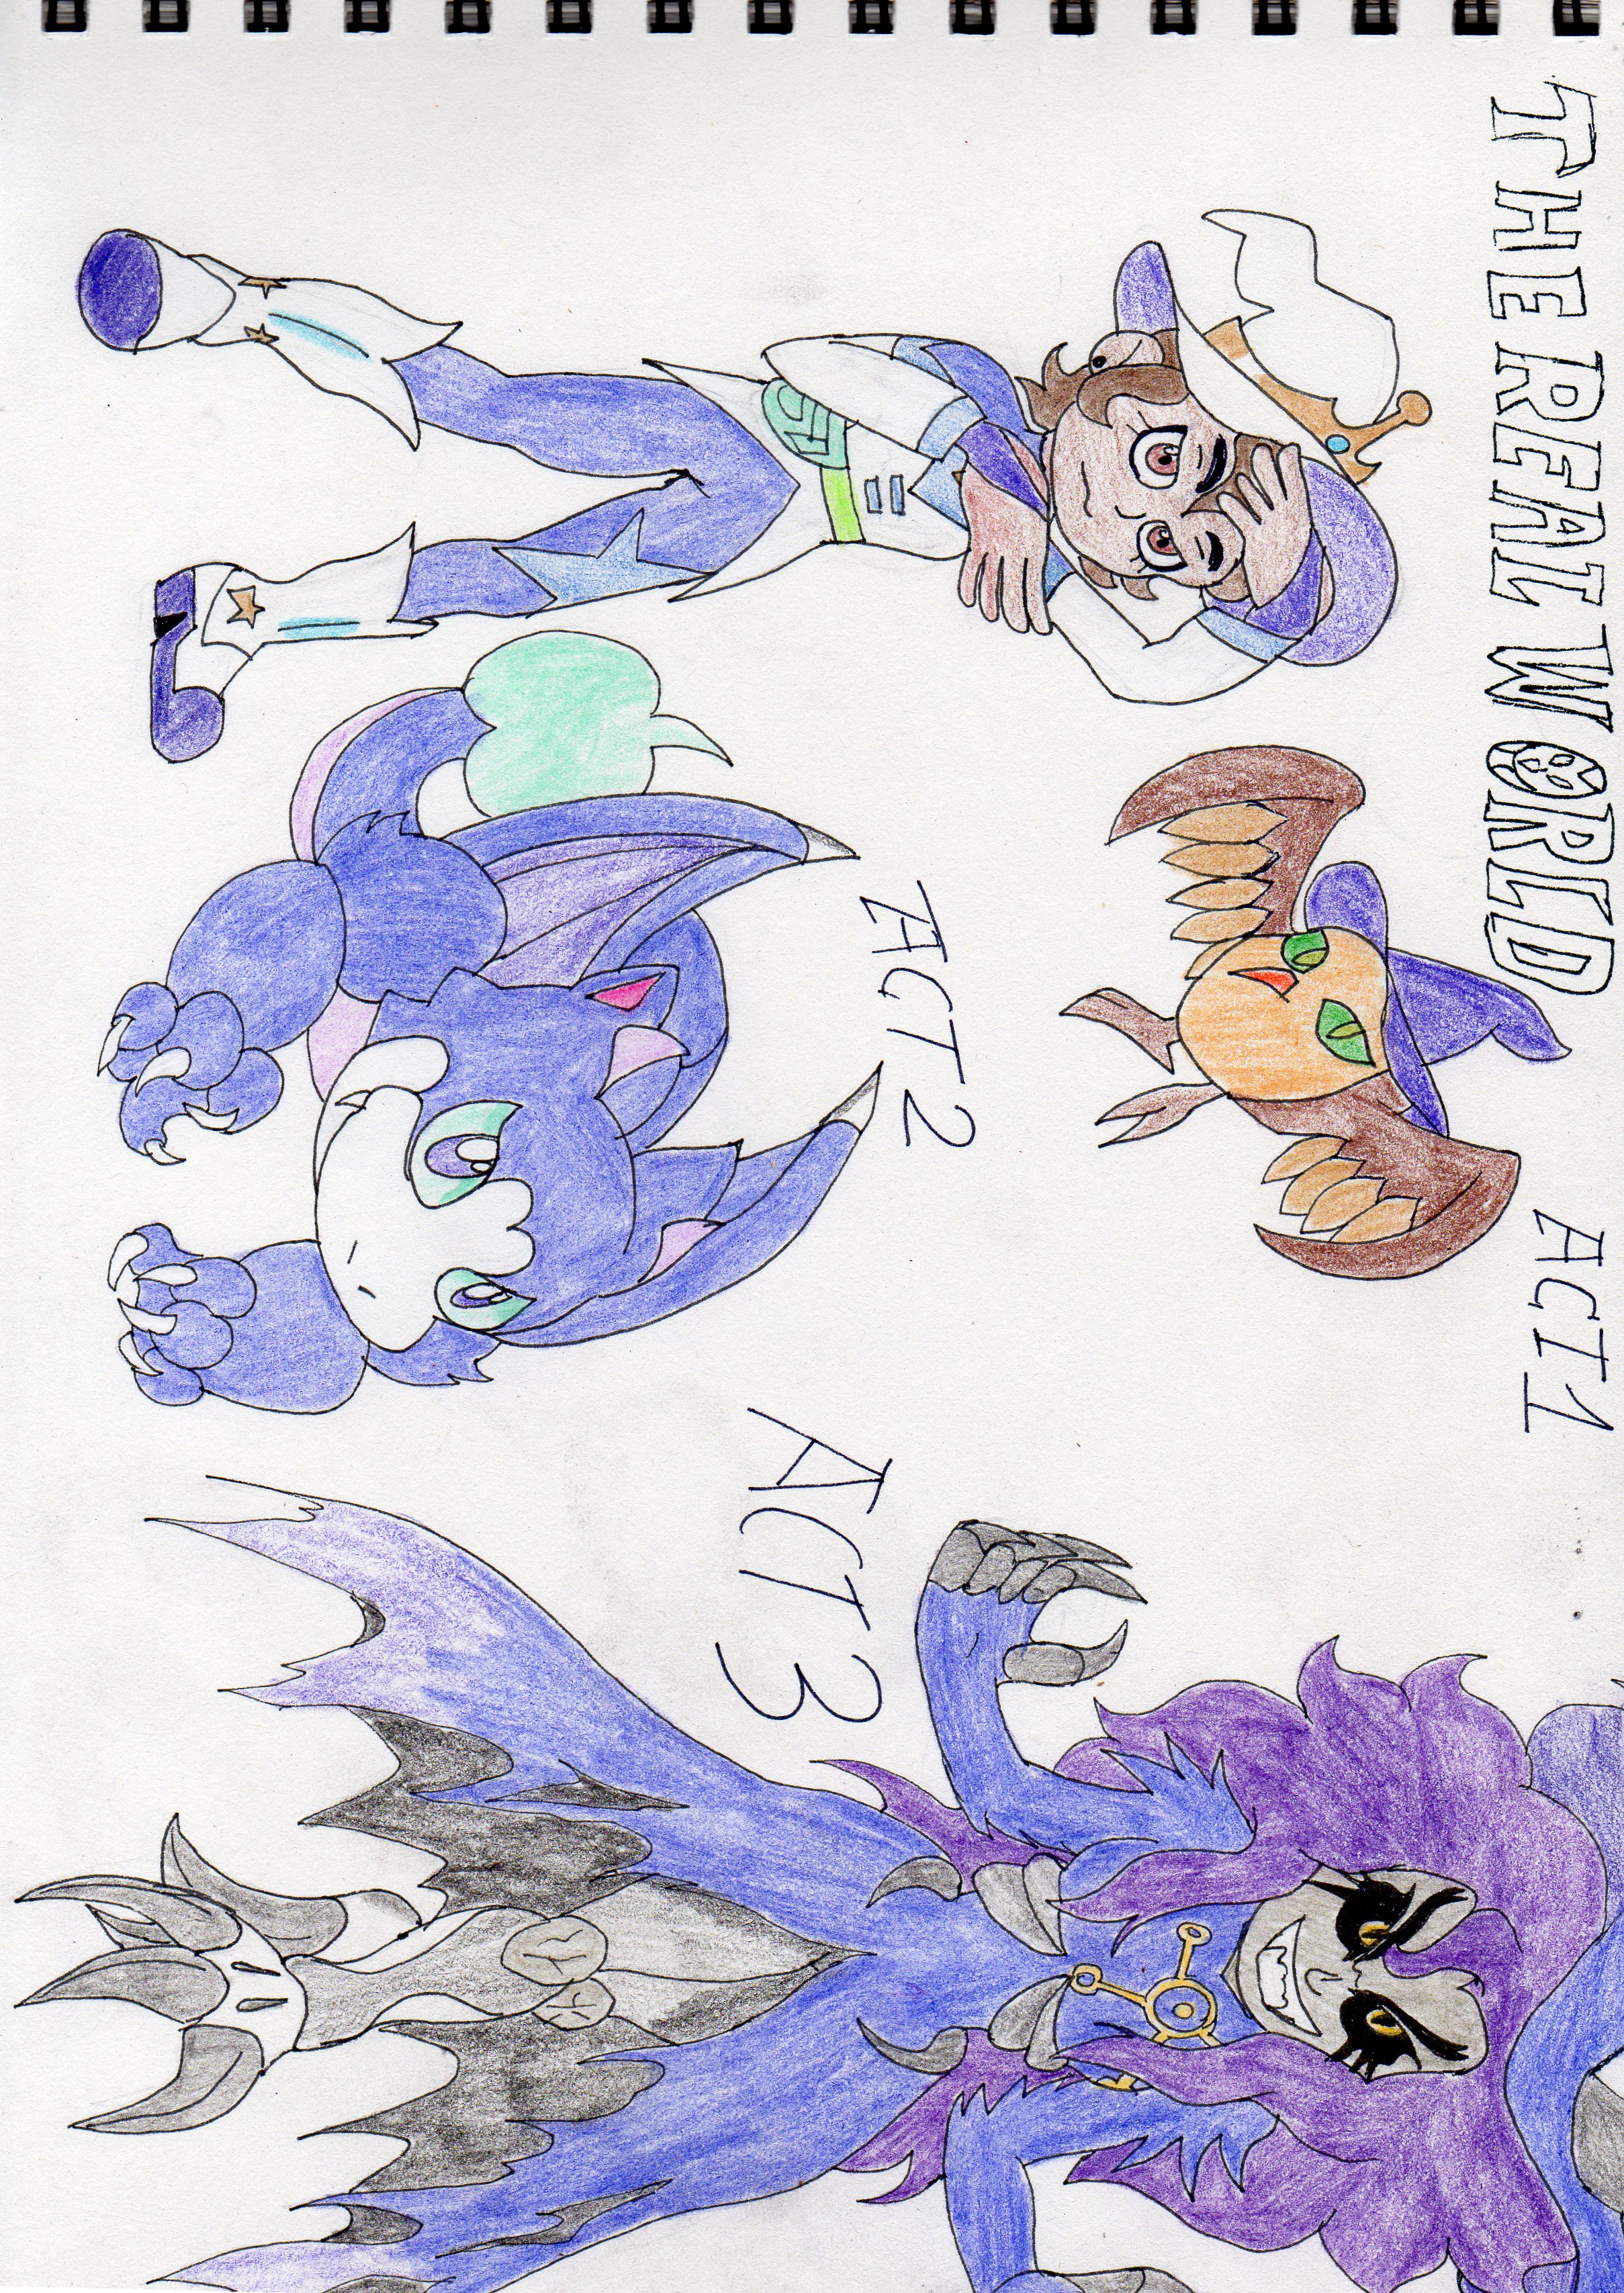 The Owl House Luz Noceda Character Designs by MMMarconi127 on DeviantArt